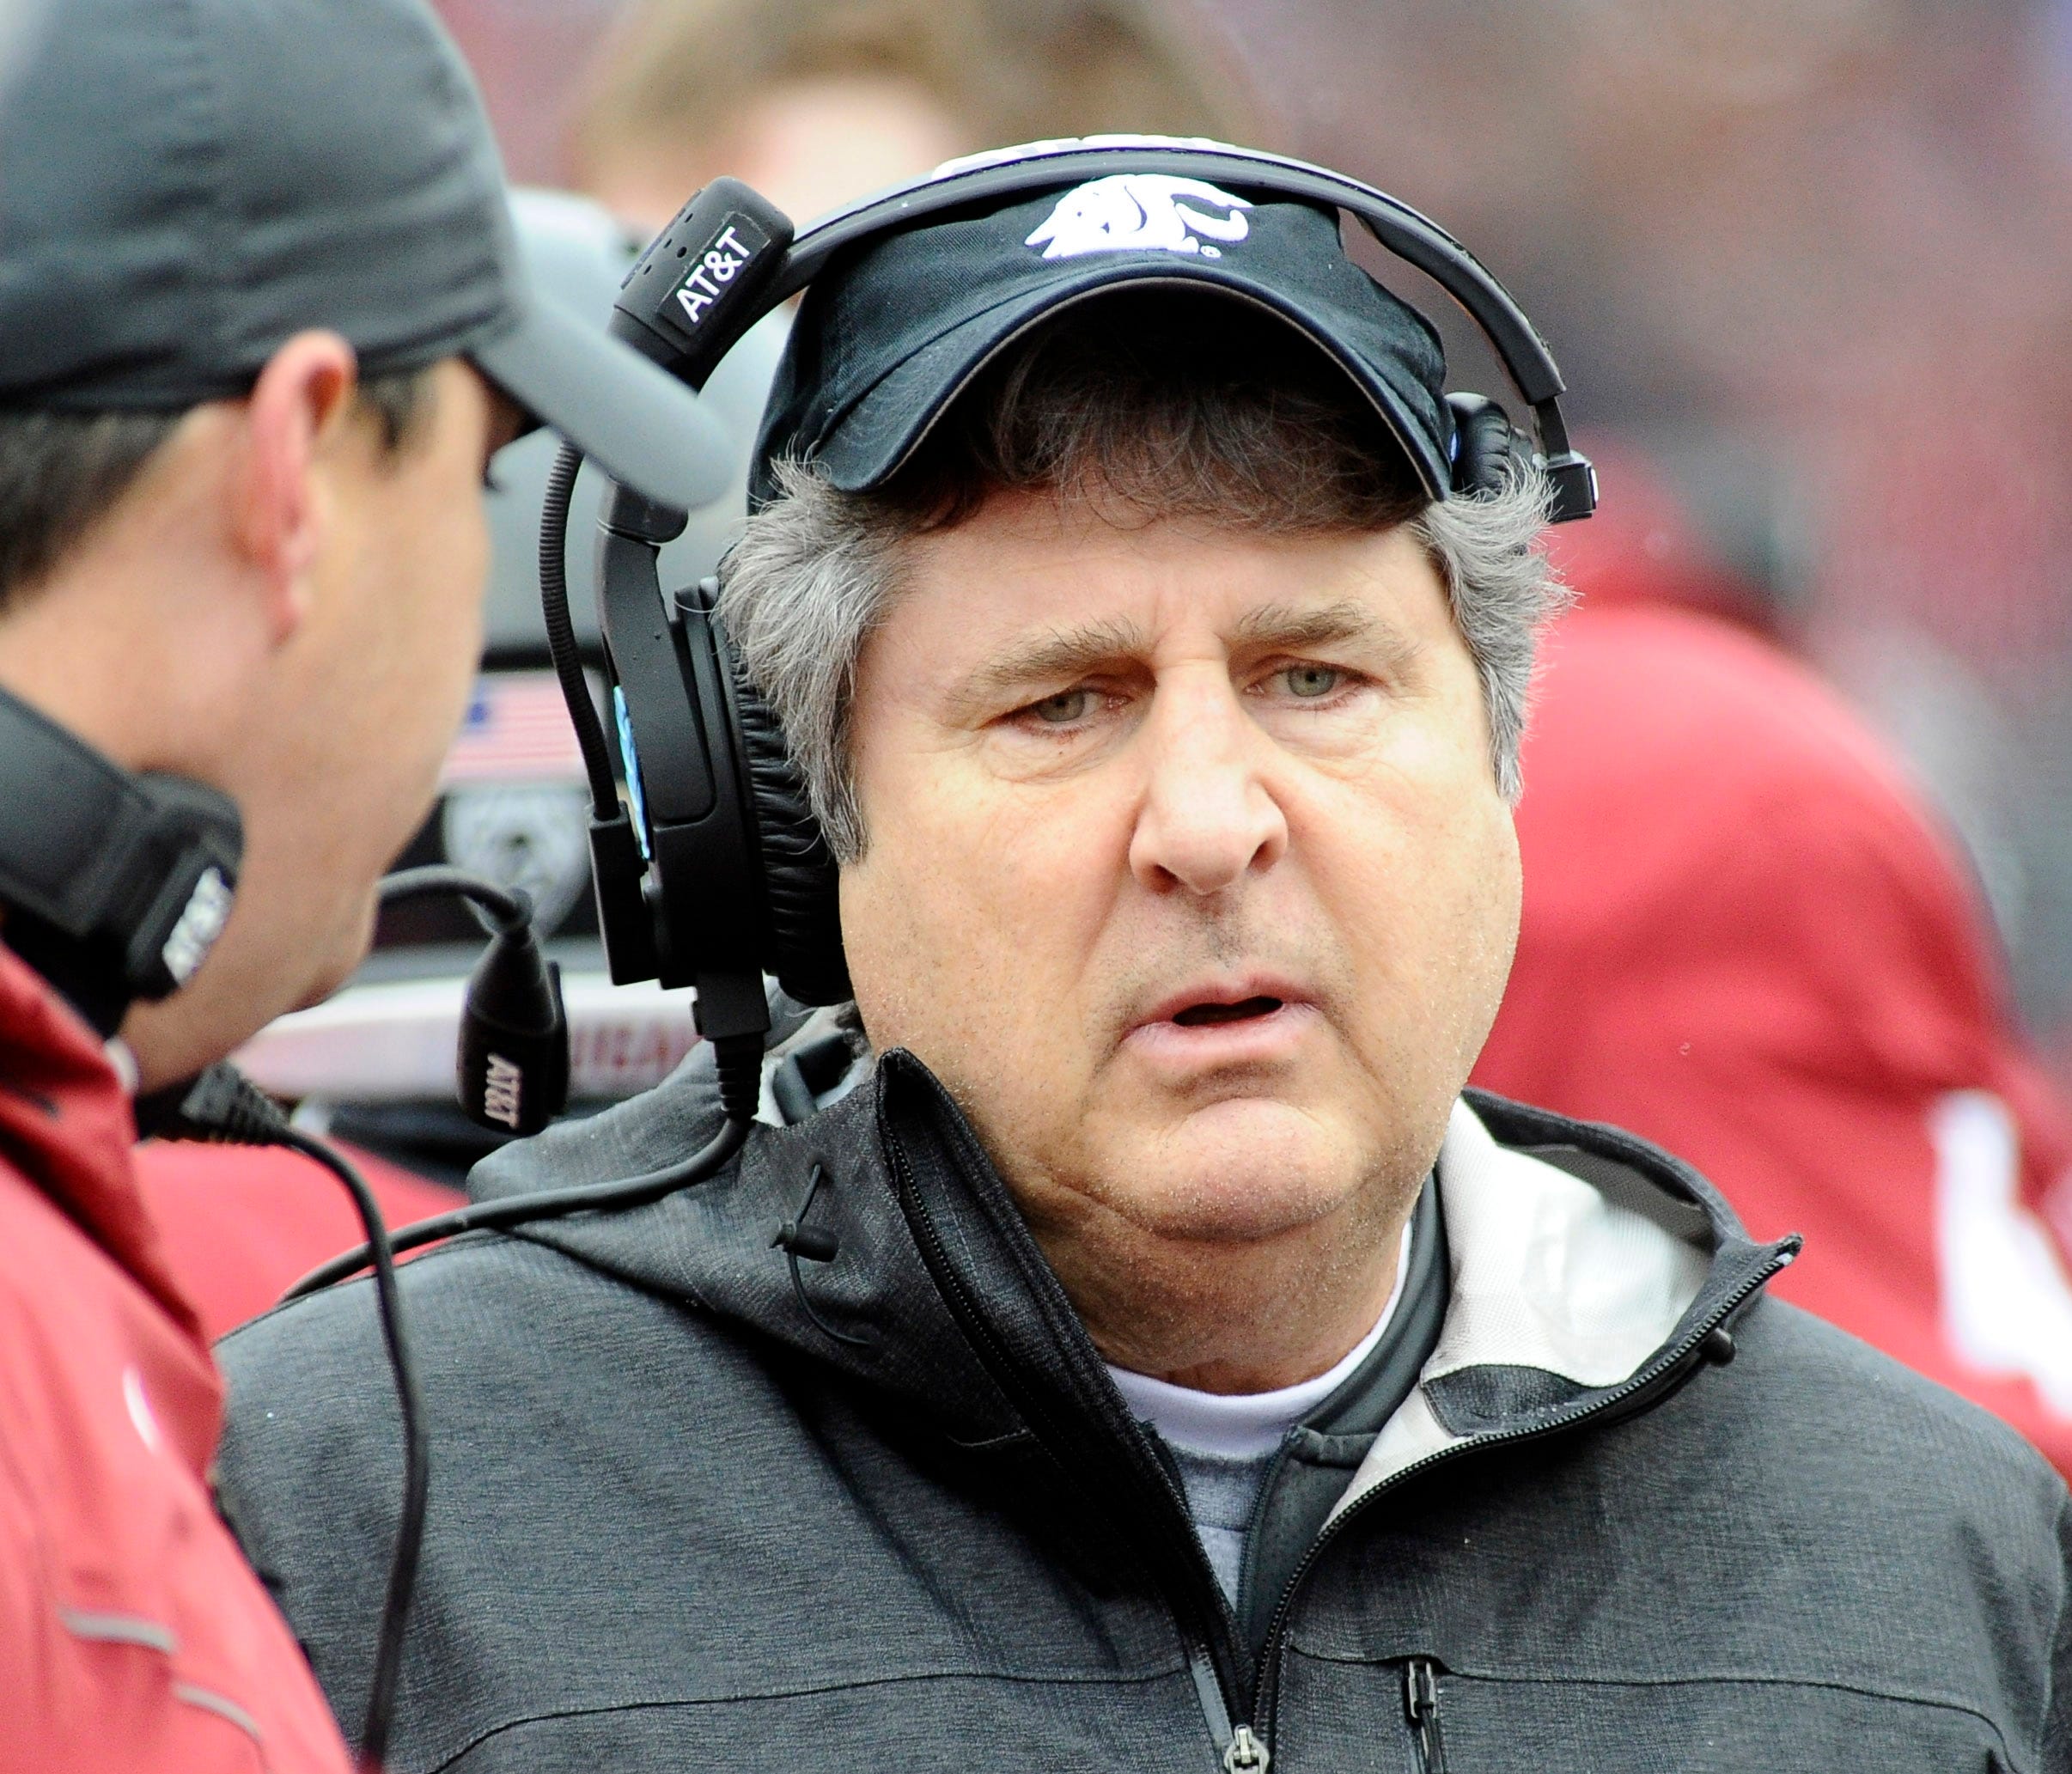 Nov 4, 2017; Pullman, WA, USA; Washington State Cougars head coach Mike Leach looks on during a game against the Stanford Cardinal at Martin Stadium. Mandatory Credit: James Snook-USA TODAY Sports ORG XMIT: USATSI-360047 ORIG FILE ID:  20171104_pjc_a